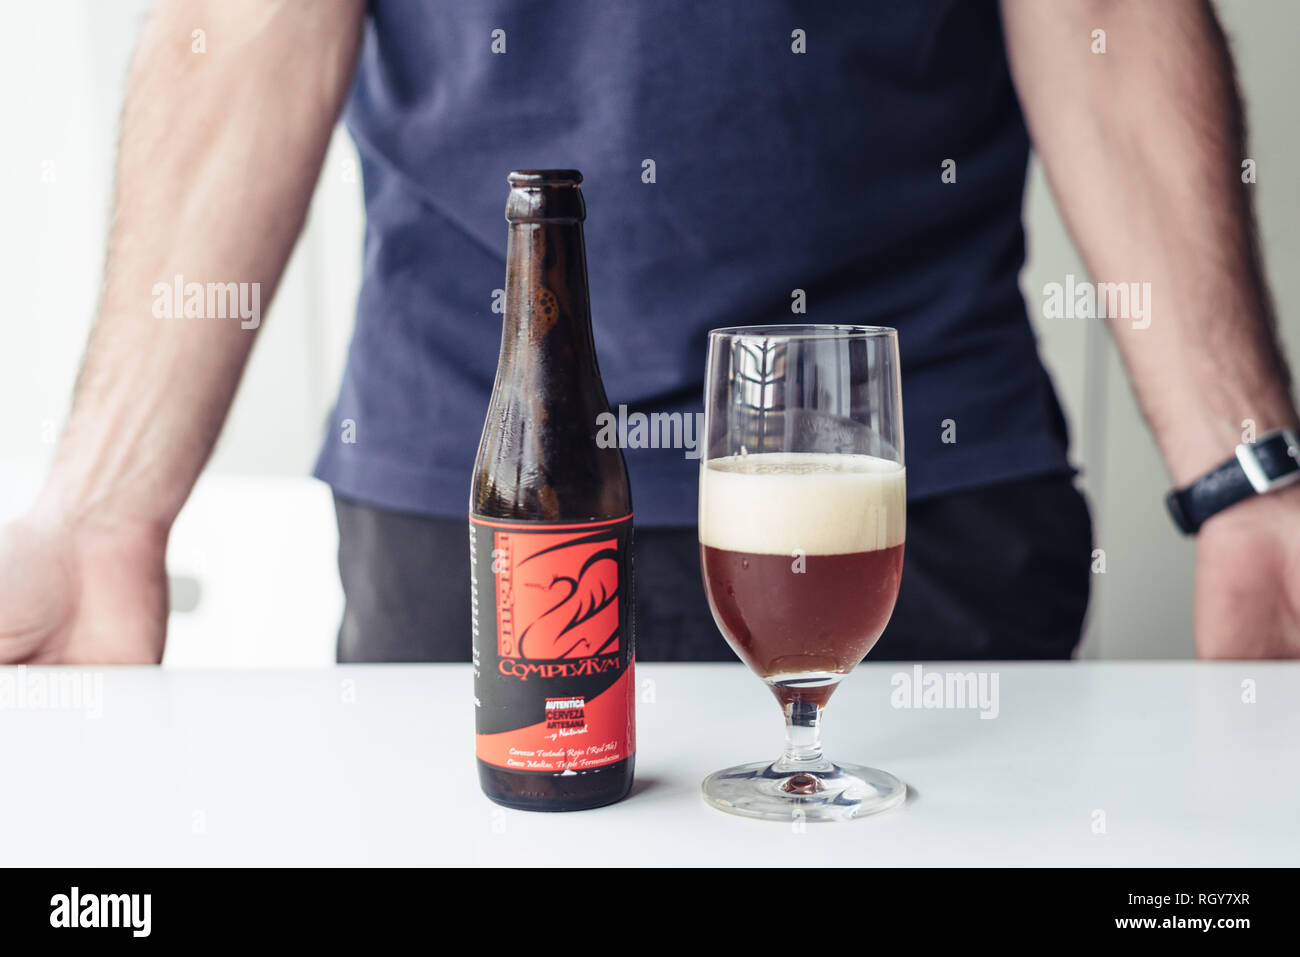 Madrid, Spain - November 10, 2018: Man serving craft beer from bottle in glass cup. Stock Photo